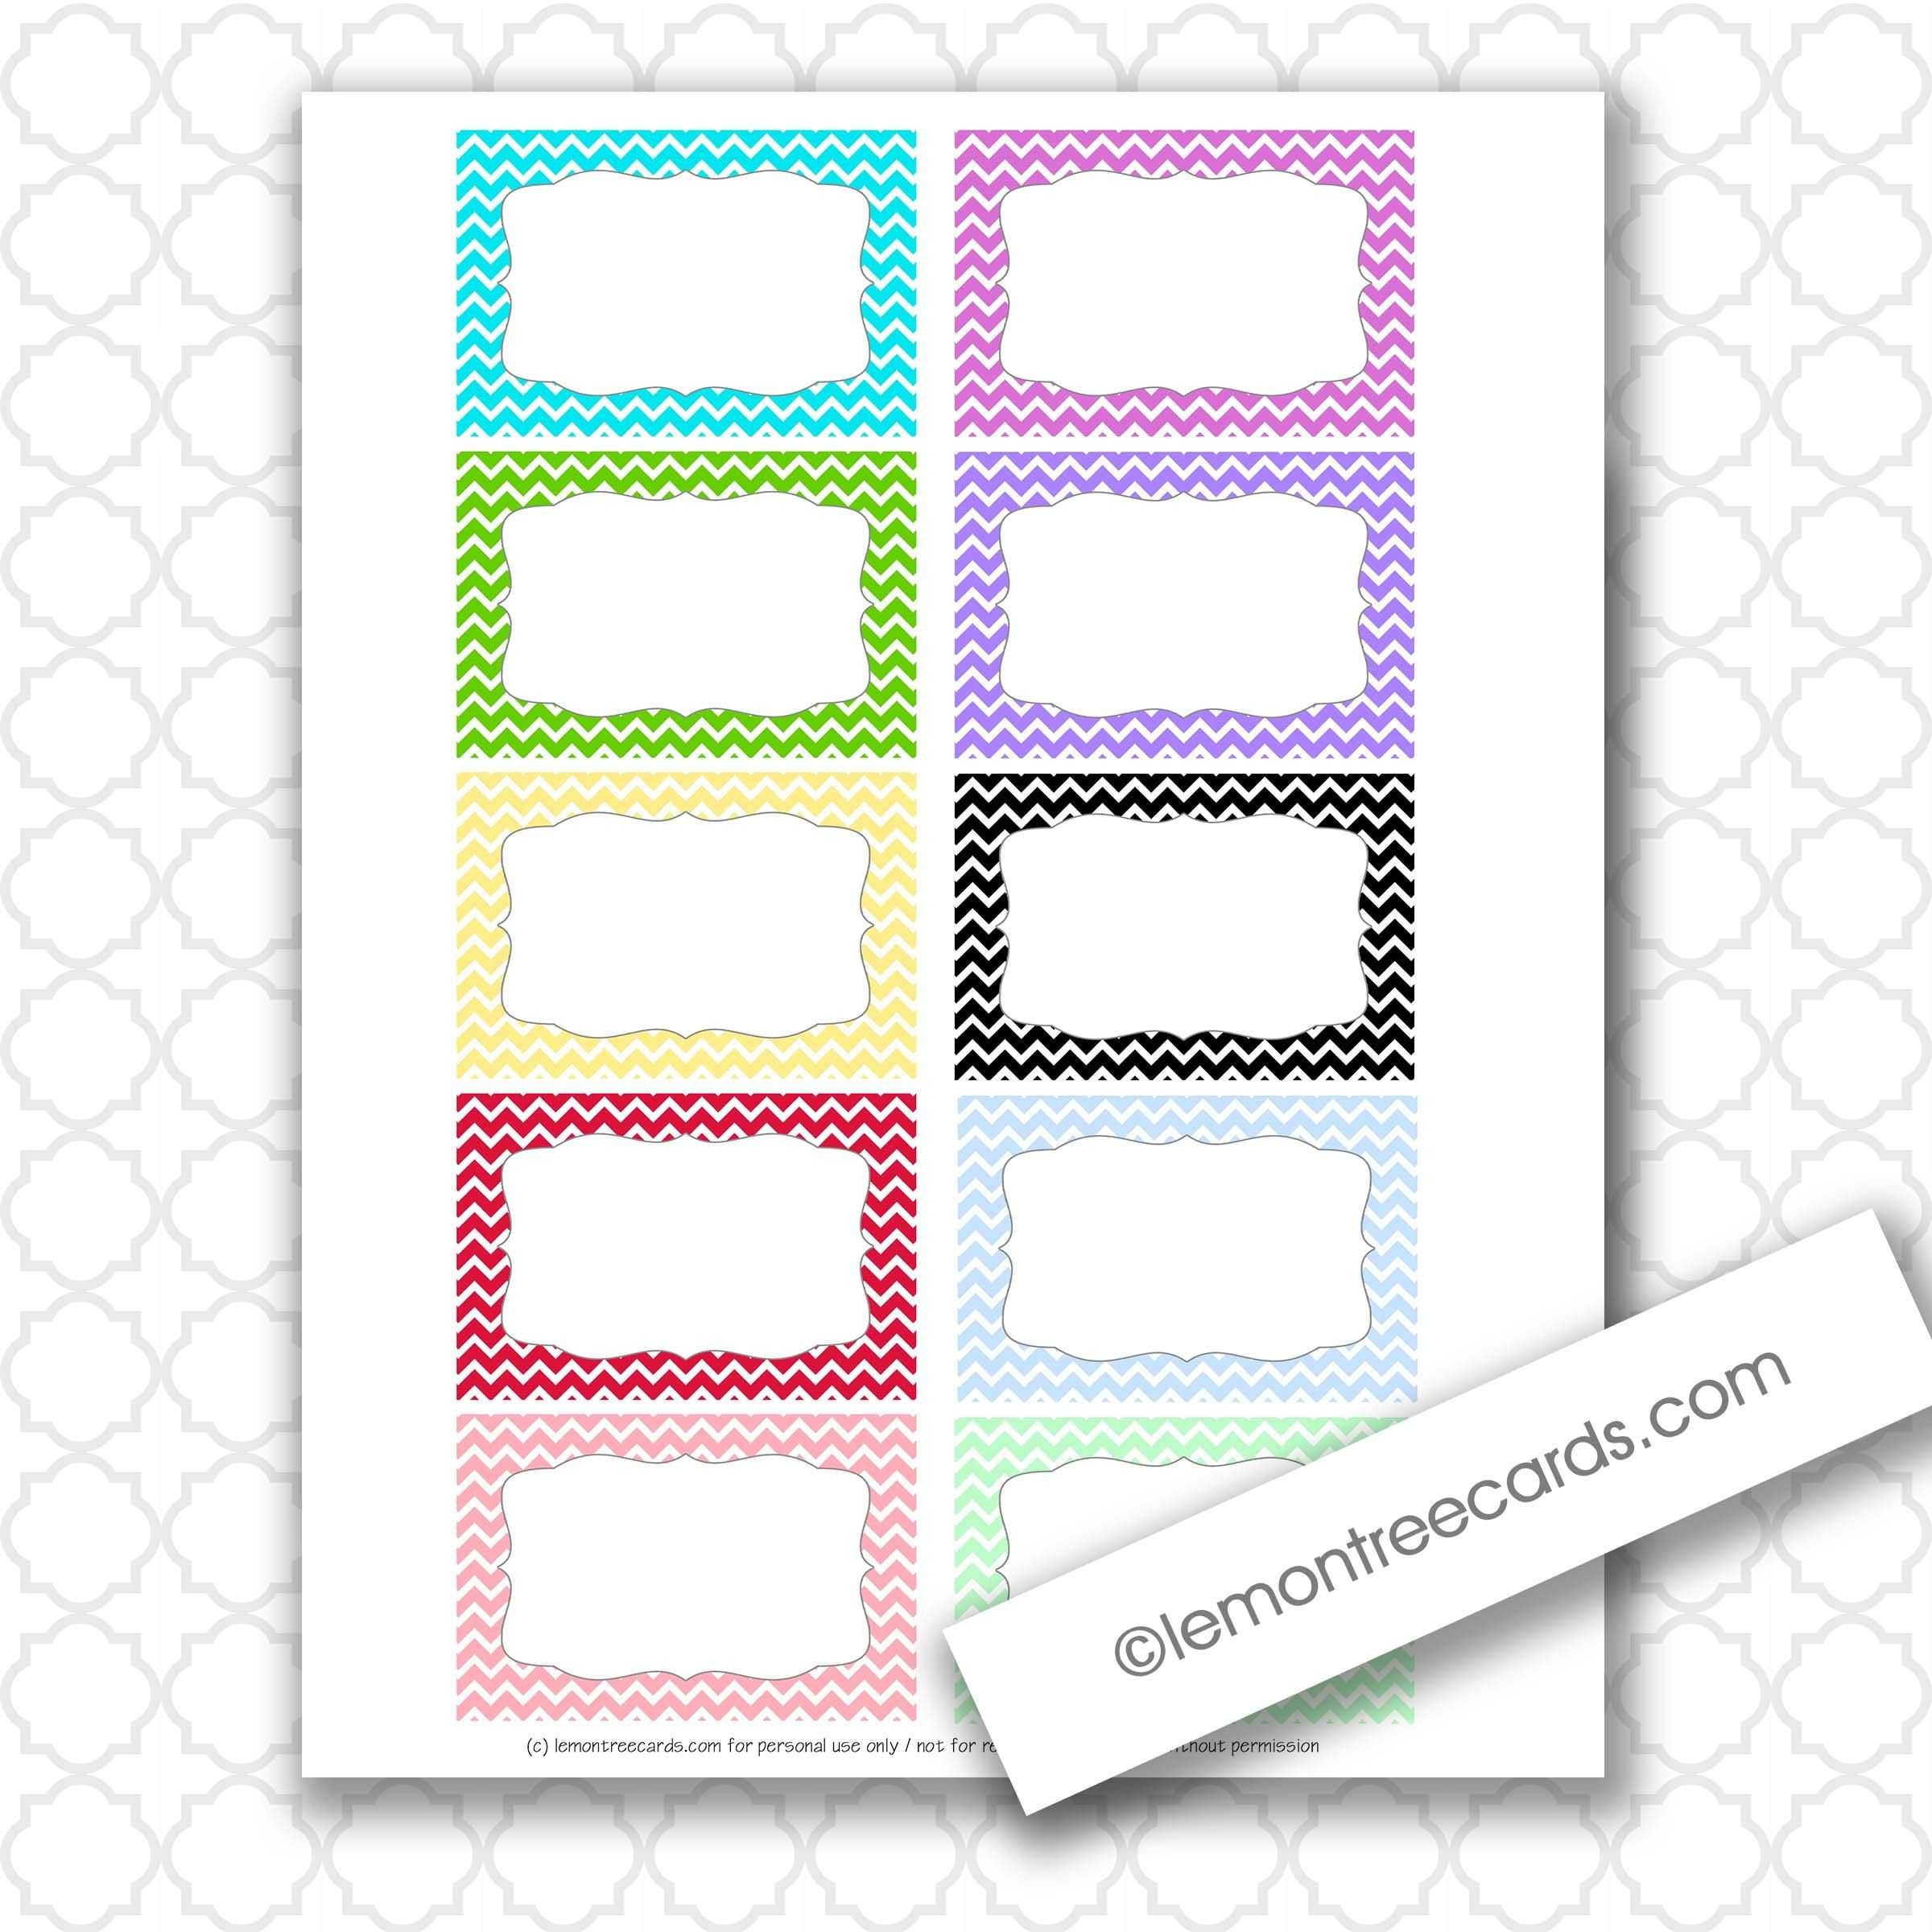 007 Free Index Card Template Ideas Surprising Printable With Regard To 3X5 Blank Index Card Template